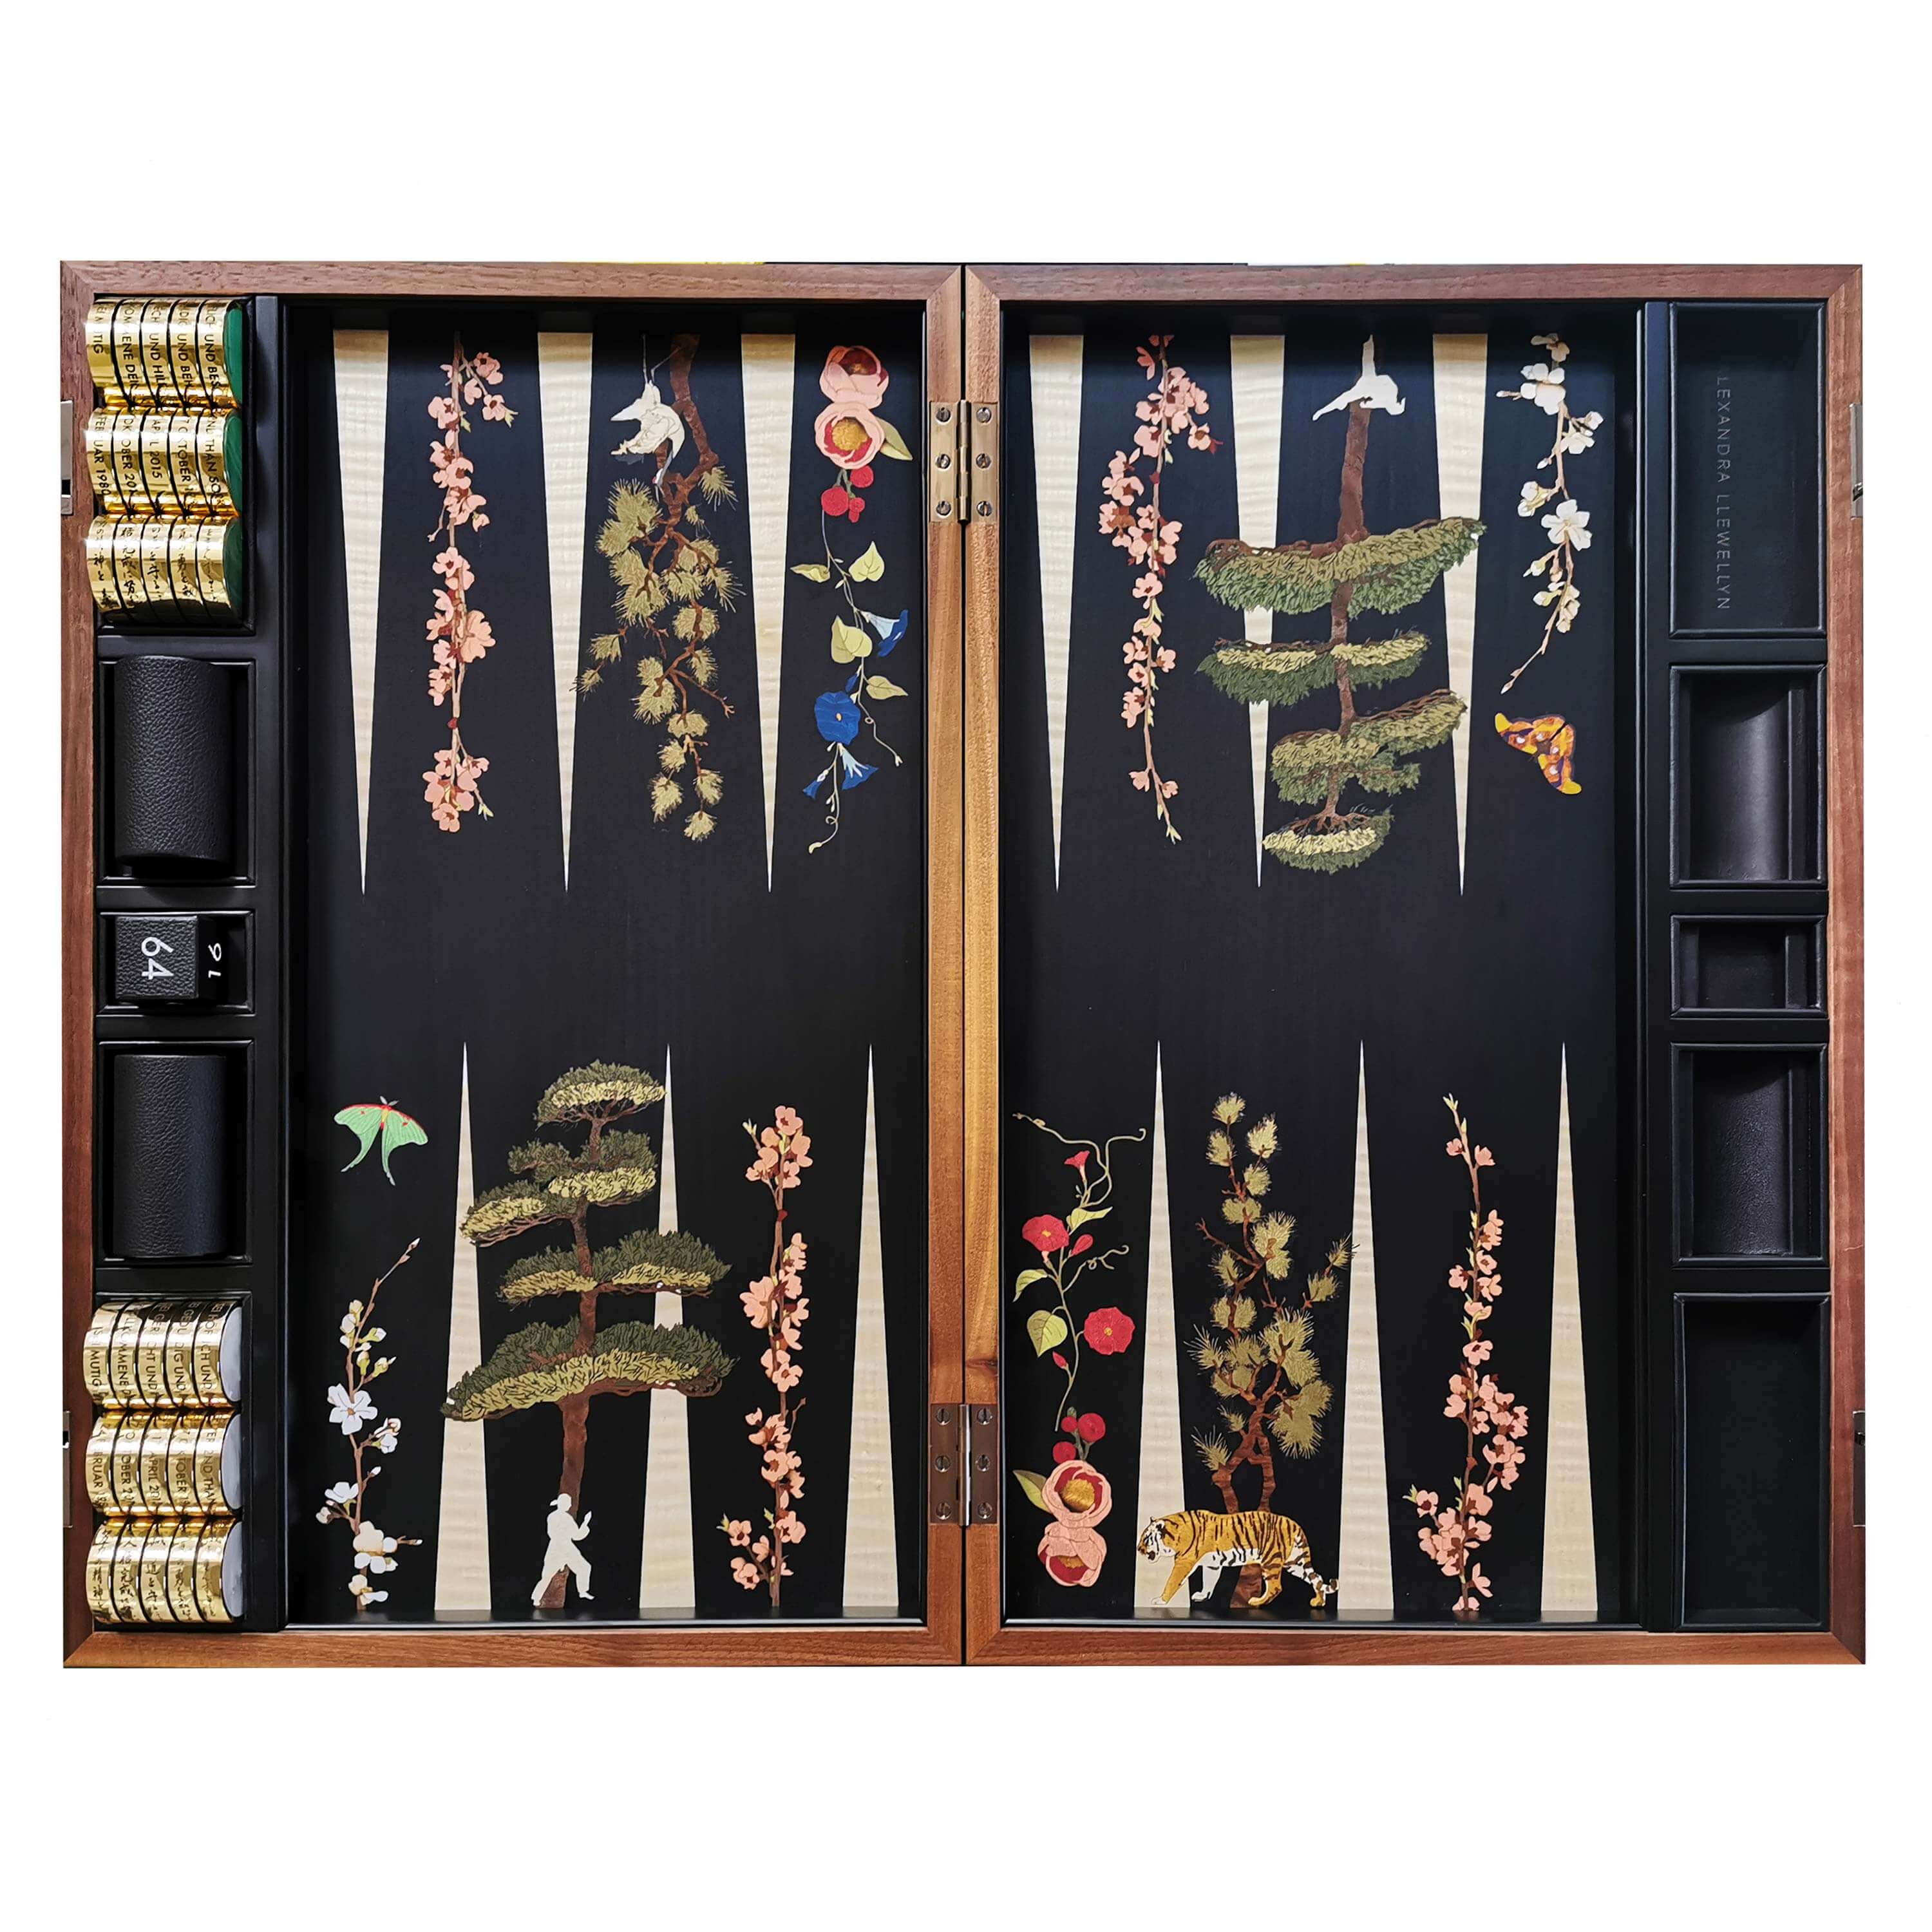 A bespoke marquetry backgammonn set with tigers and Japanese flora and fauna